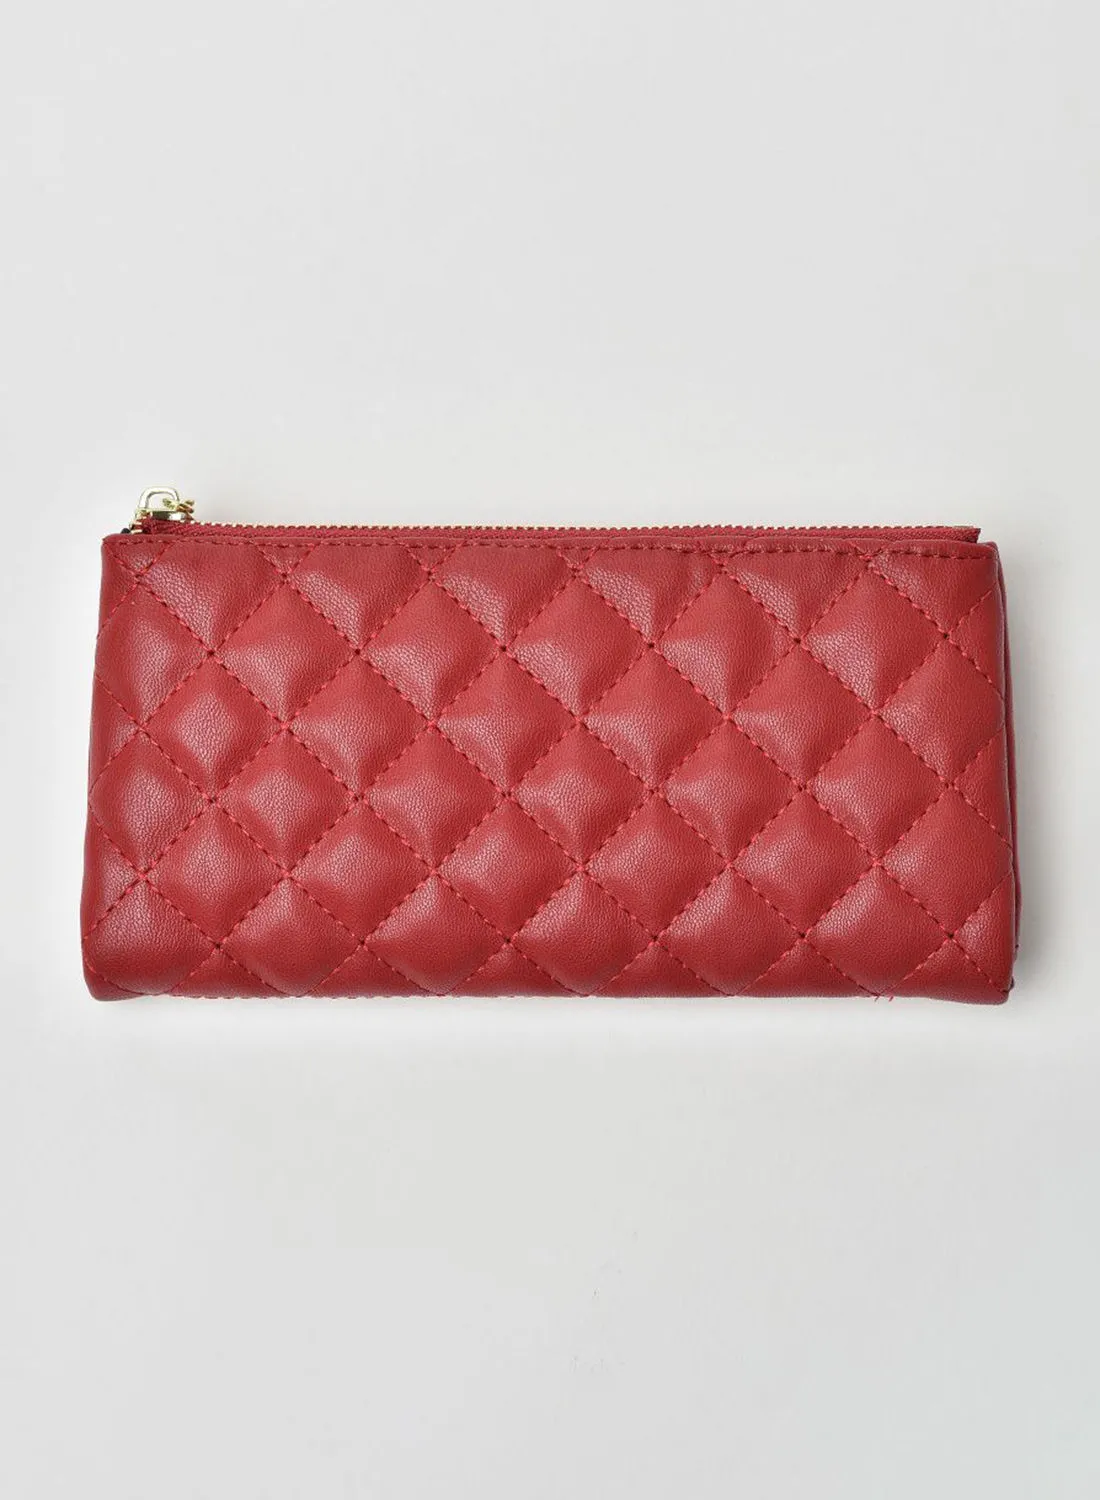 Jove Women's Fashionable Trendy Clutch Red